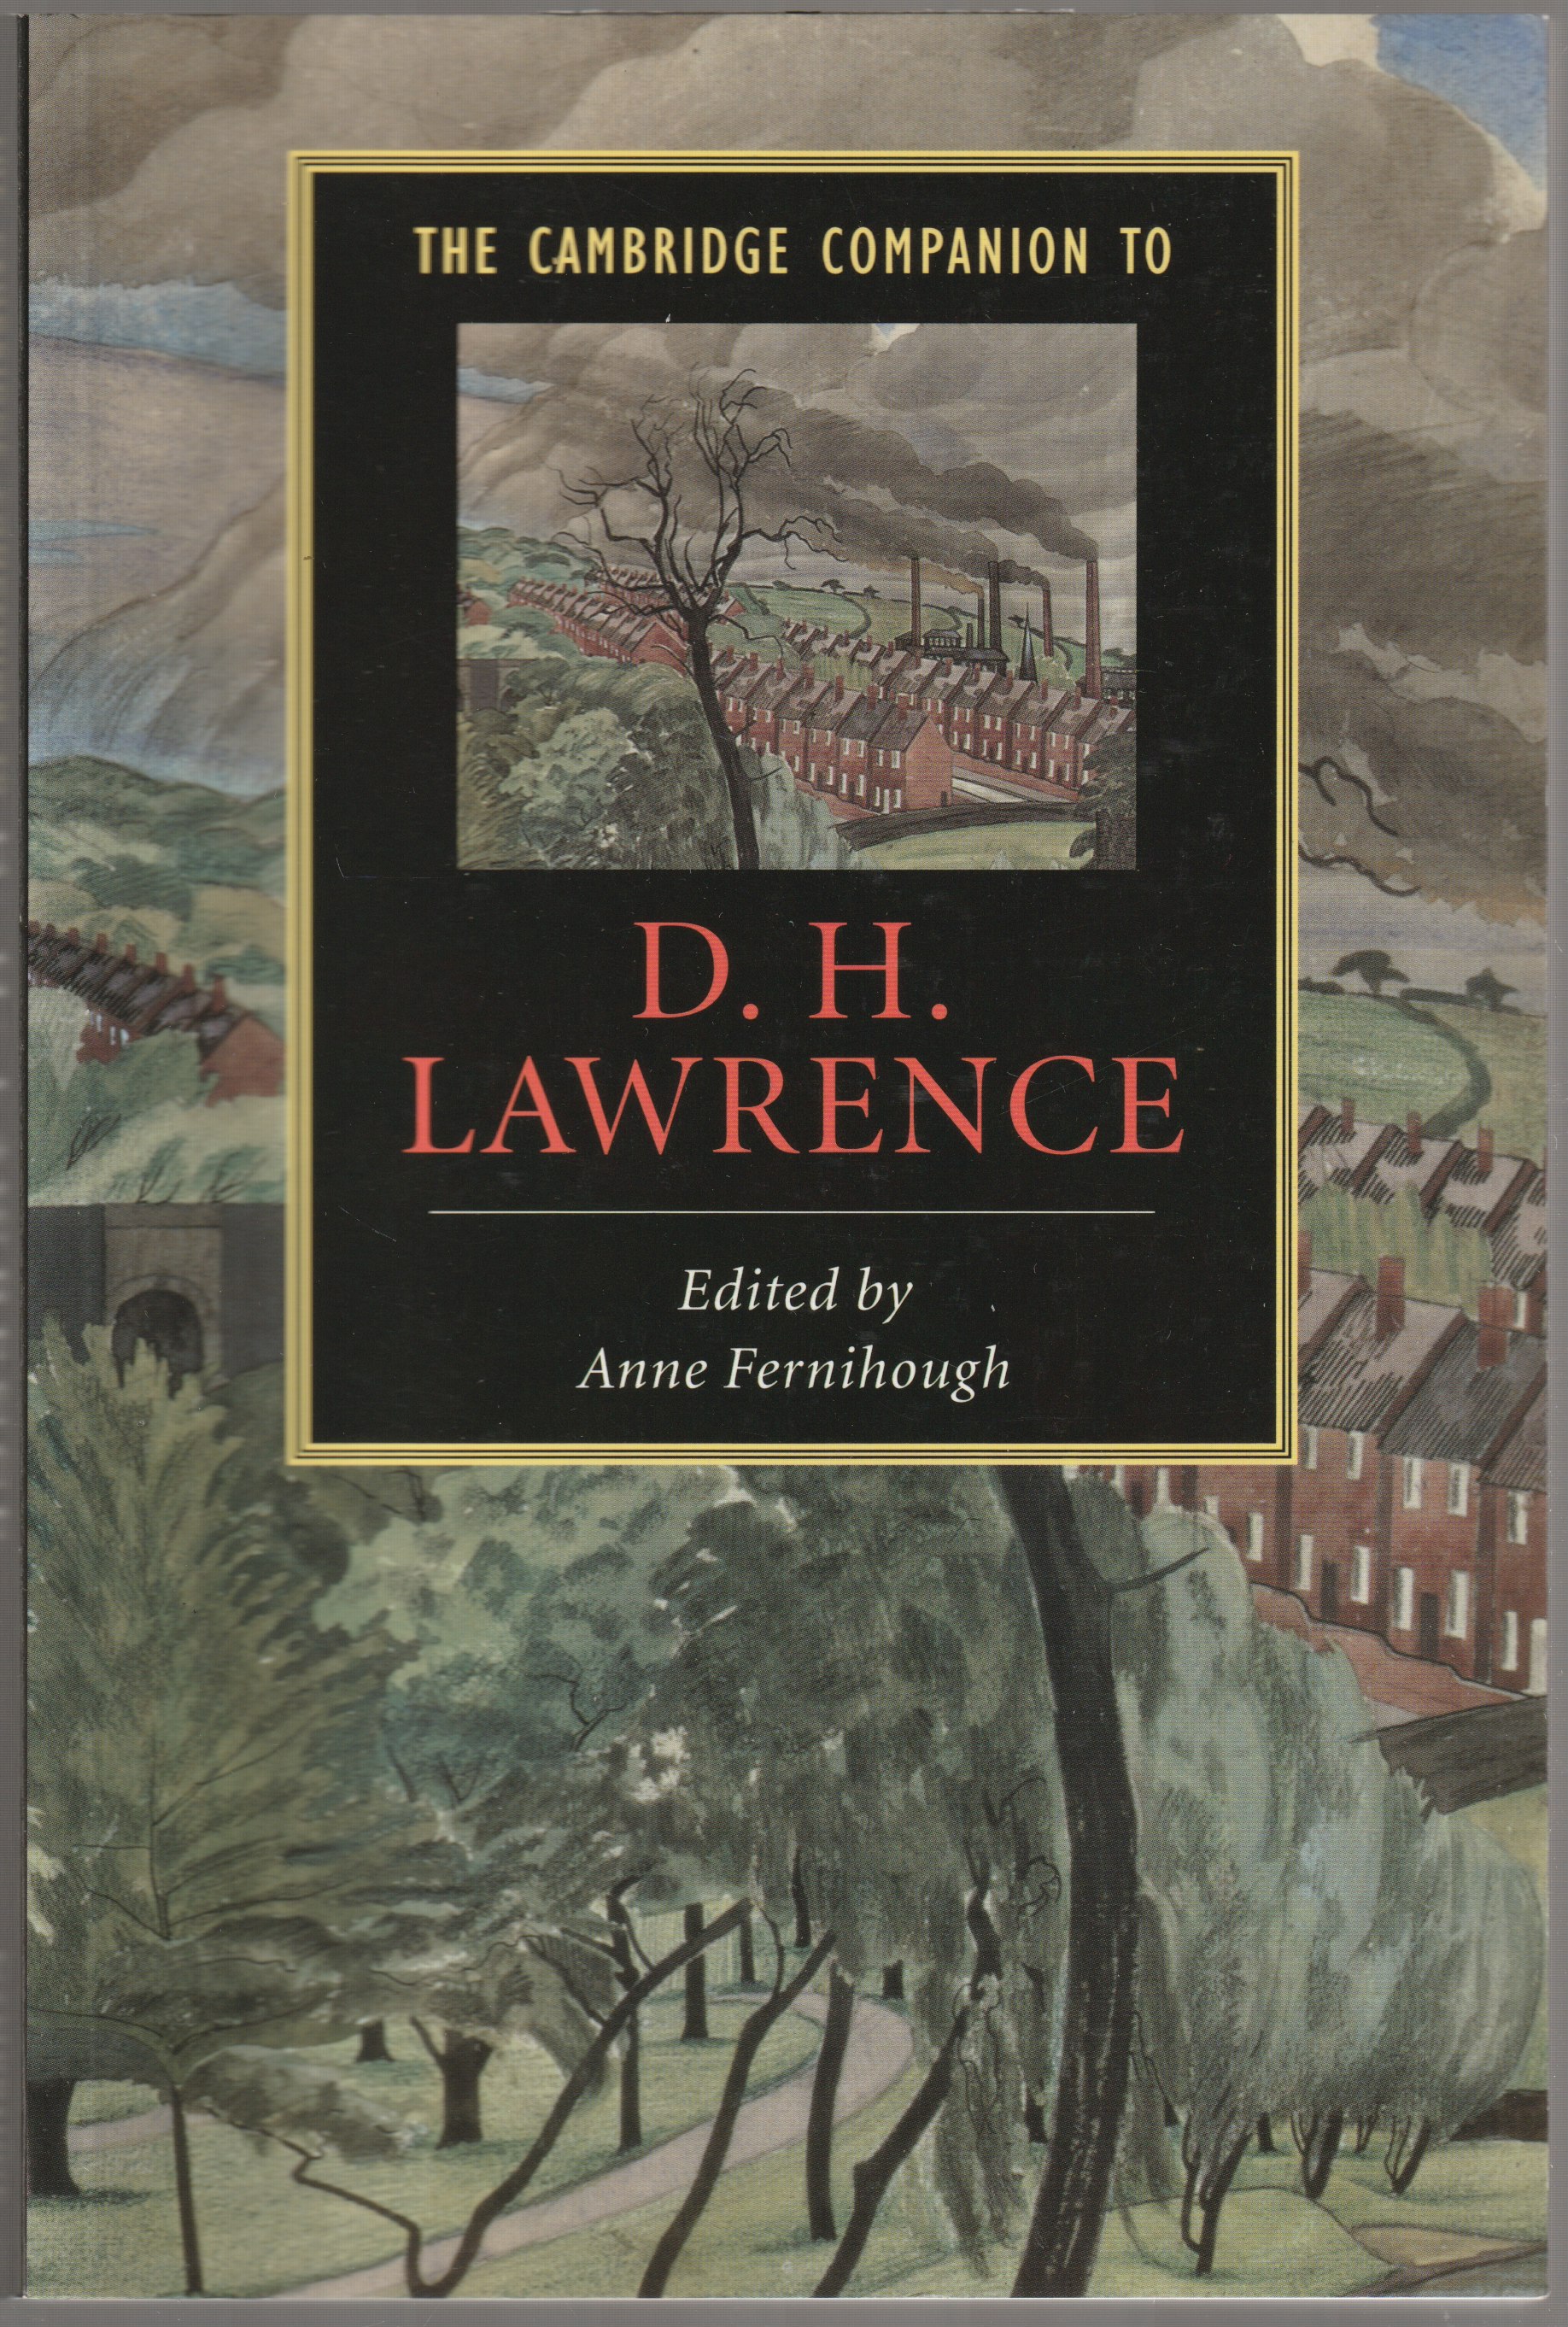 The Cambridge companion to D.H. Lawrence